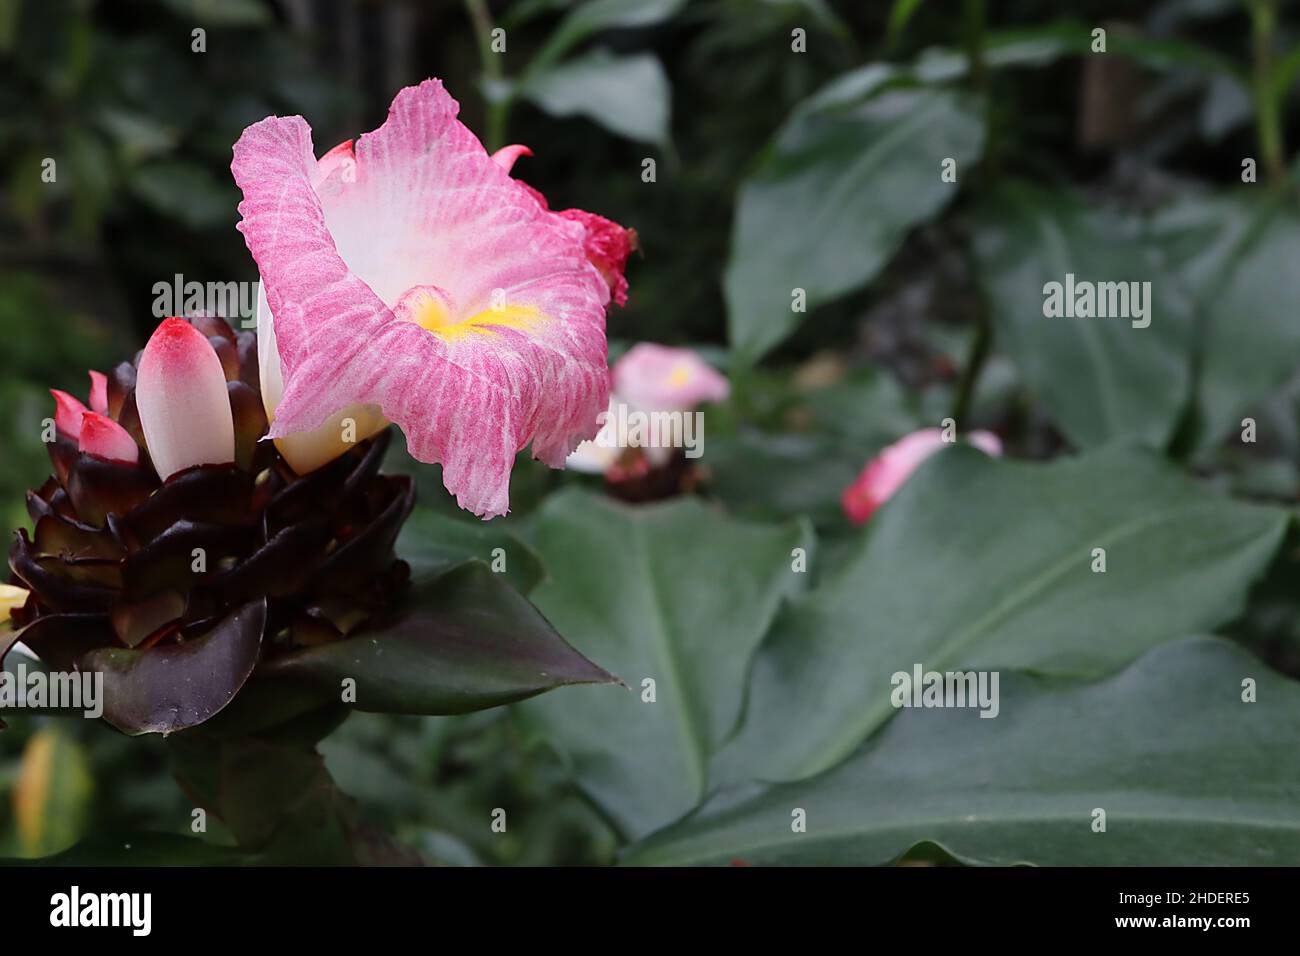 Costus louisii ink spiral ginger – white funnel-shaped flowers with deep pink recurved lip, large wide ovate dark green leaves,  January, England, UK Stock Photo